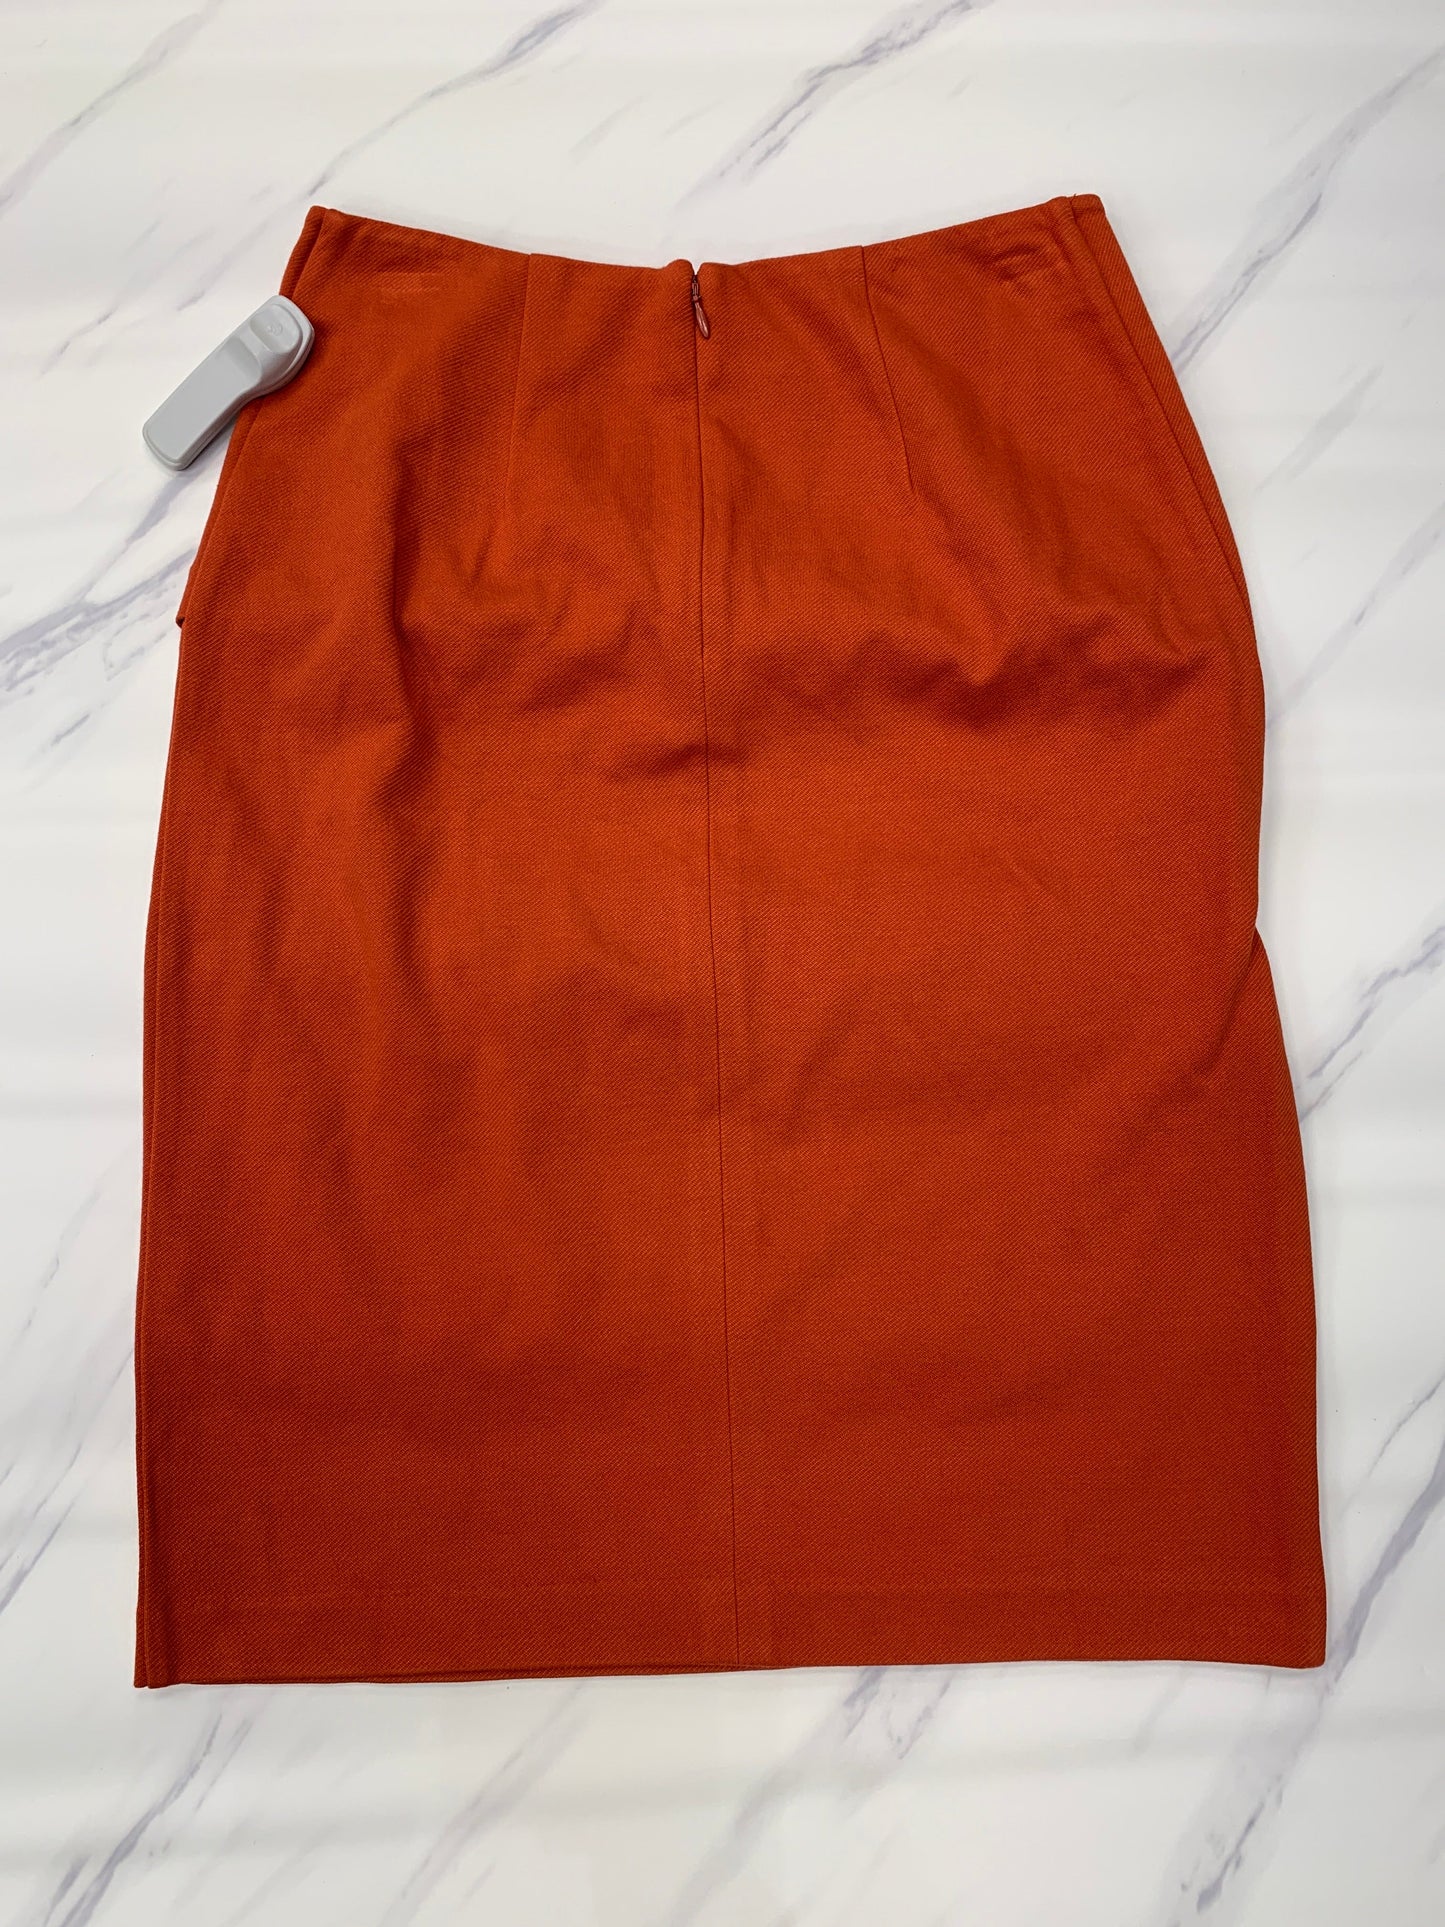 Skirt Midi By Cabi  Size: 4